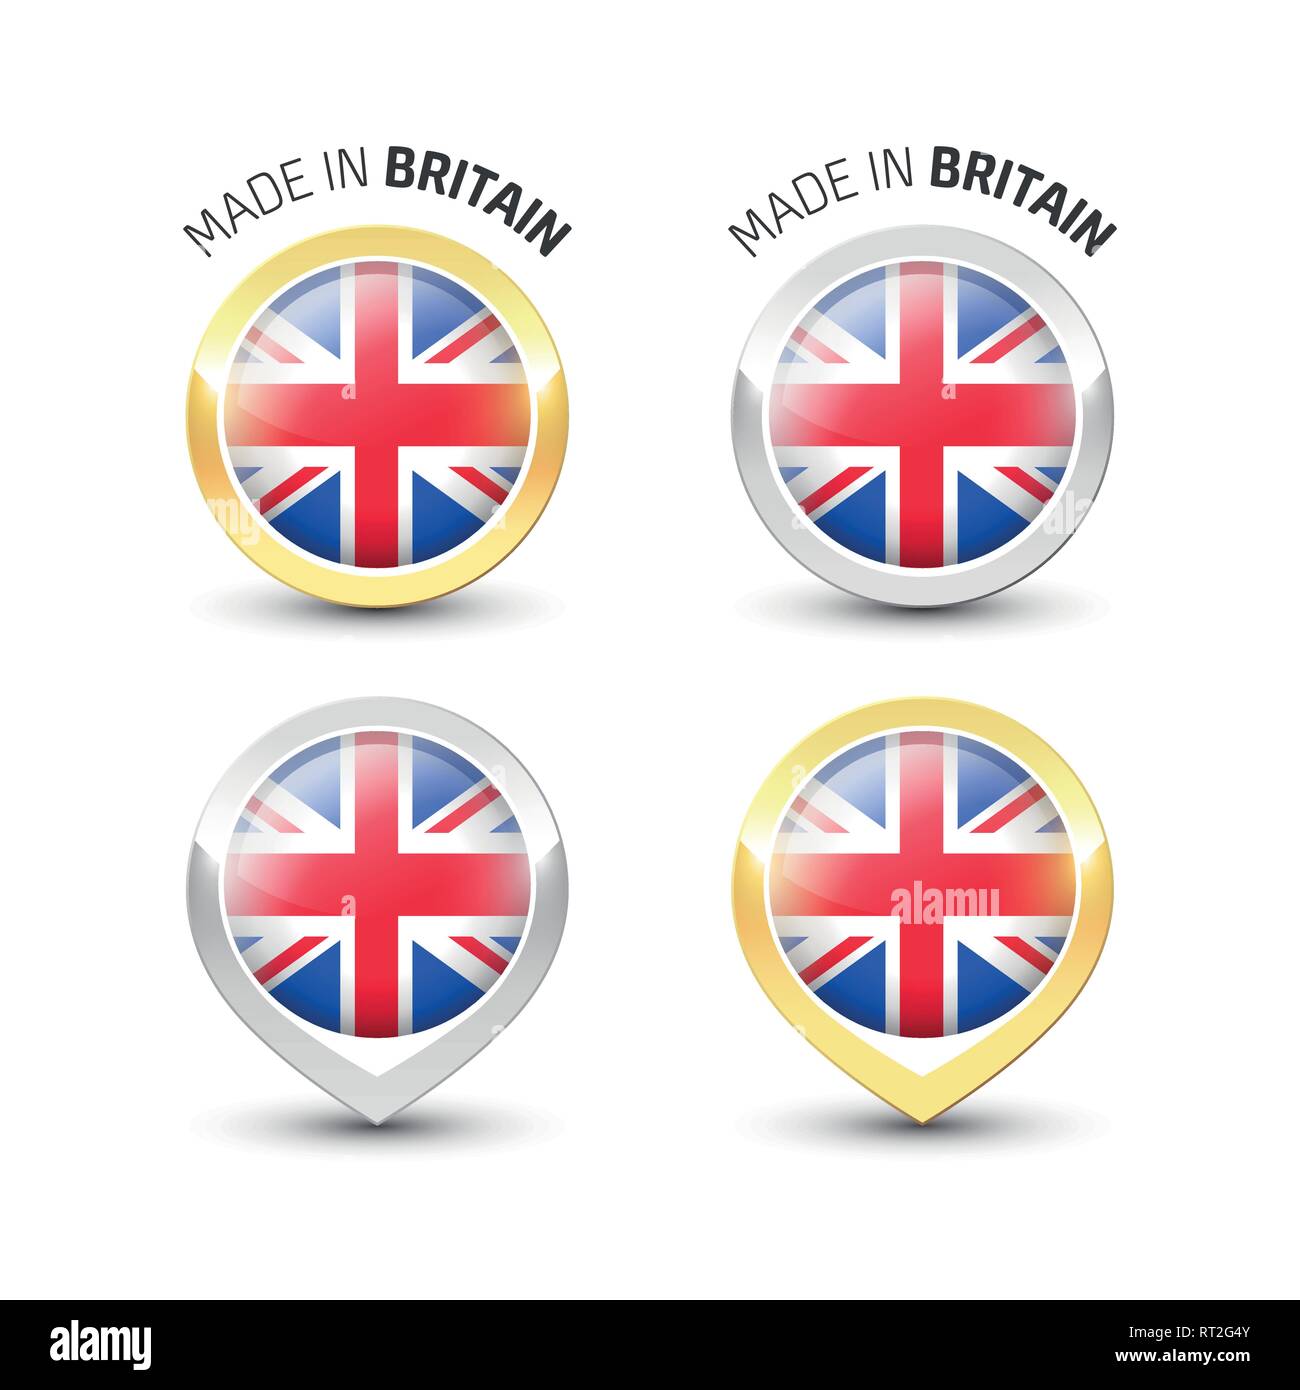 Made in Britain UK - Guarantee label with the flag of the United Kingdom inside round gold and silver icons. Stock Vector